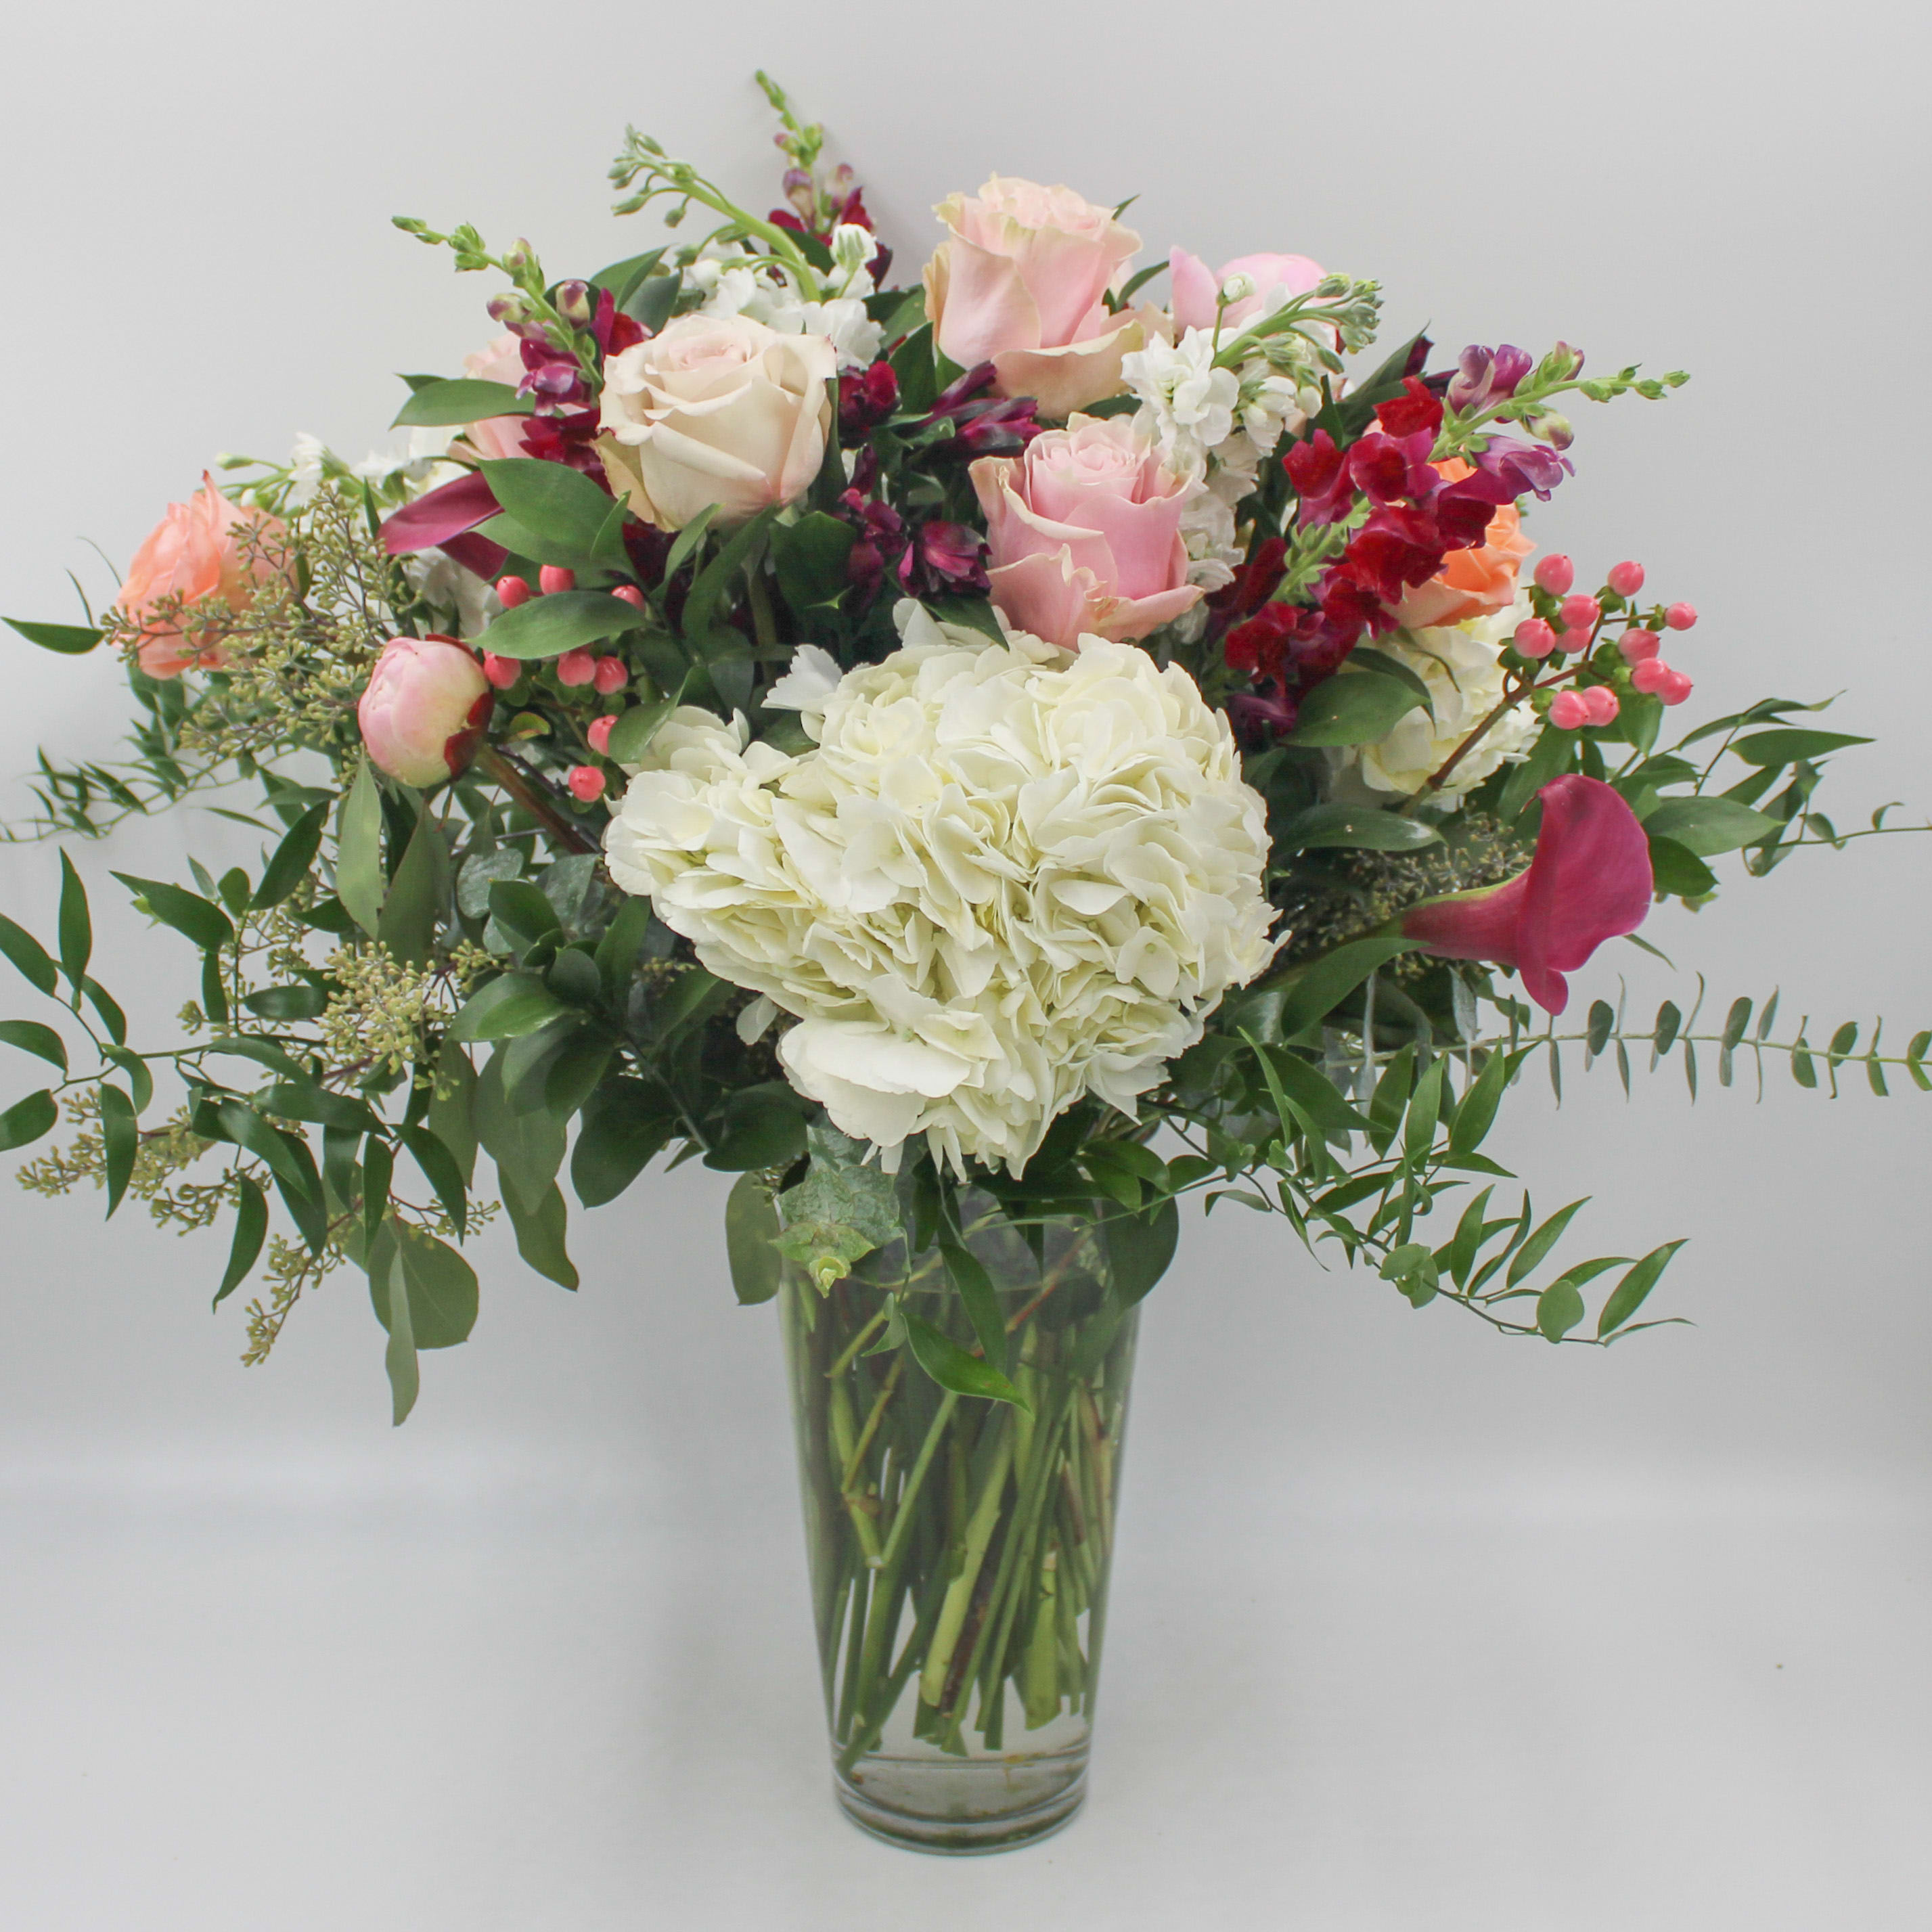 Napa Valley - Napa Valley features White Hydrangea, Light Pink Roses, Quicksand Roses, Peach Roses, Pink Hypericum Berries, Burgundy Calla Lilies, Burgundy Snapdragon, White Stock, Purple Alstromeria, Italian Ruscus, Seeded Eucalyptus and Spiral Eucalyptus. 